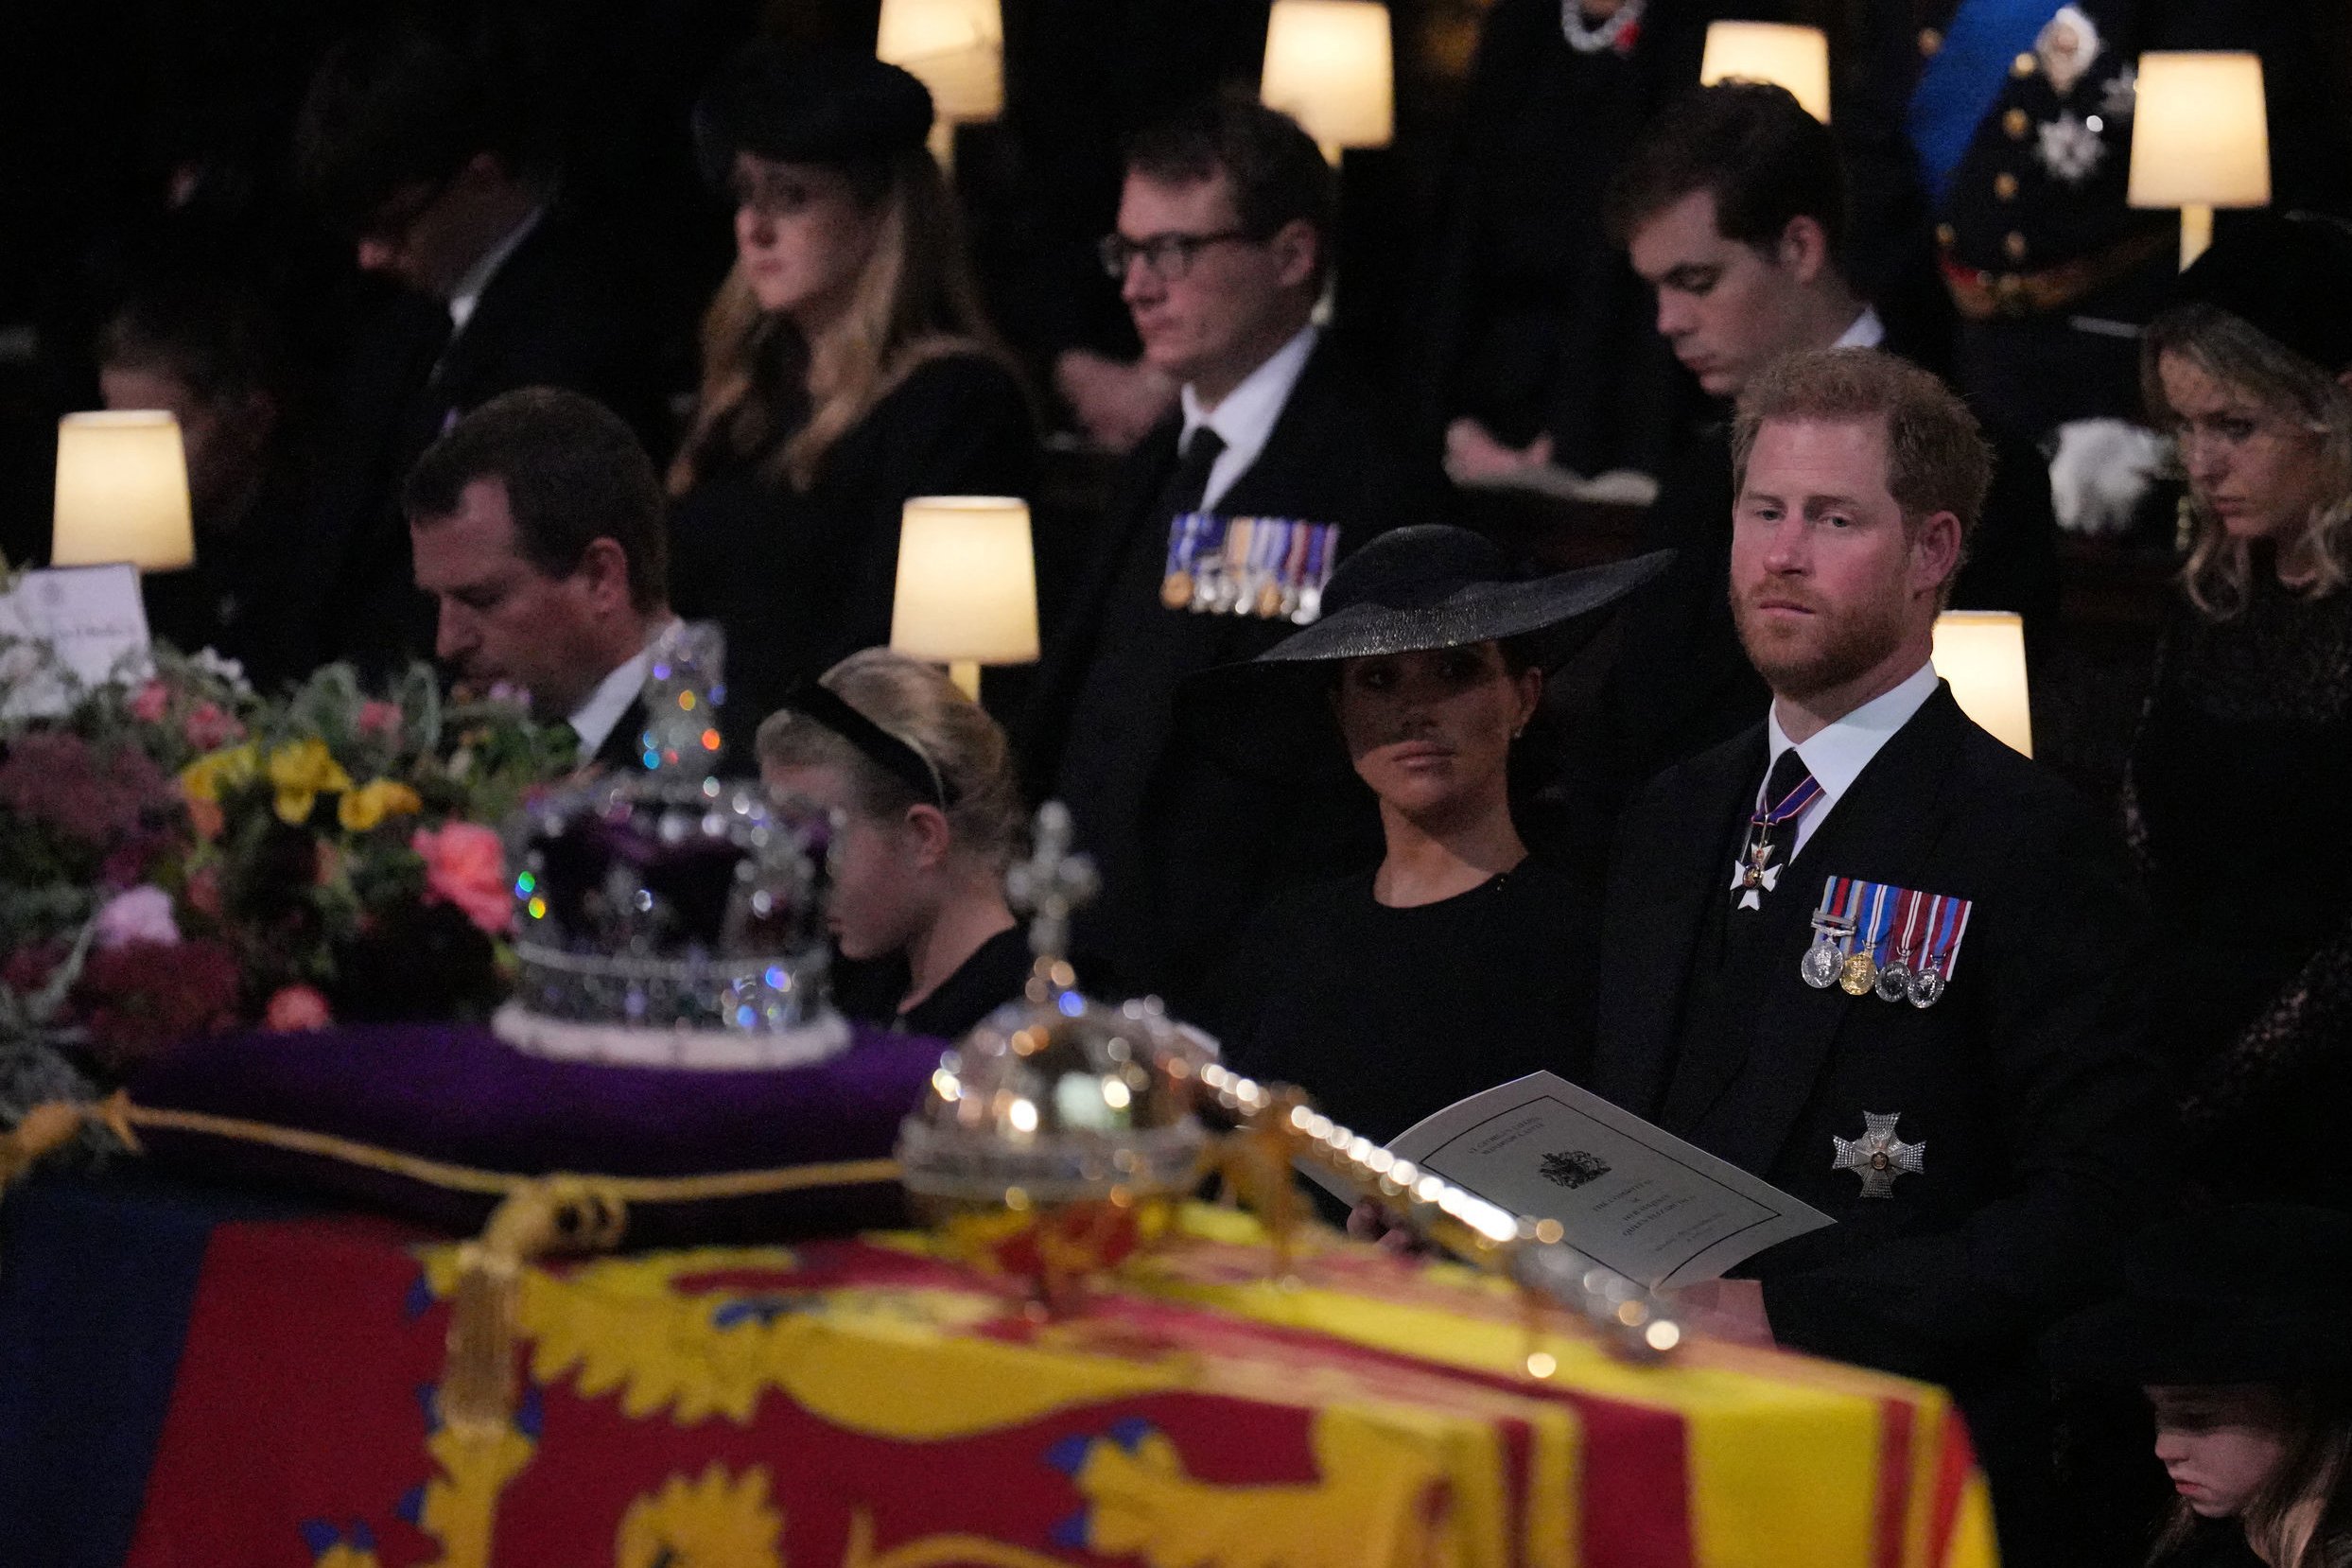 Duchess Meghan and Prince Harry at the Committal Service for Britain's Queen Elizabeth II in St George's Chapel inside Windsor Castle on September 19, 2022 | Source: Getty Images